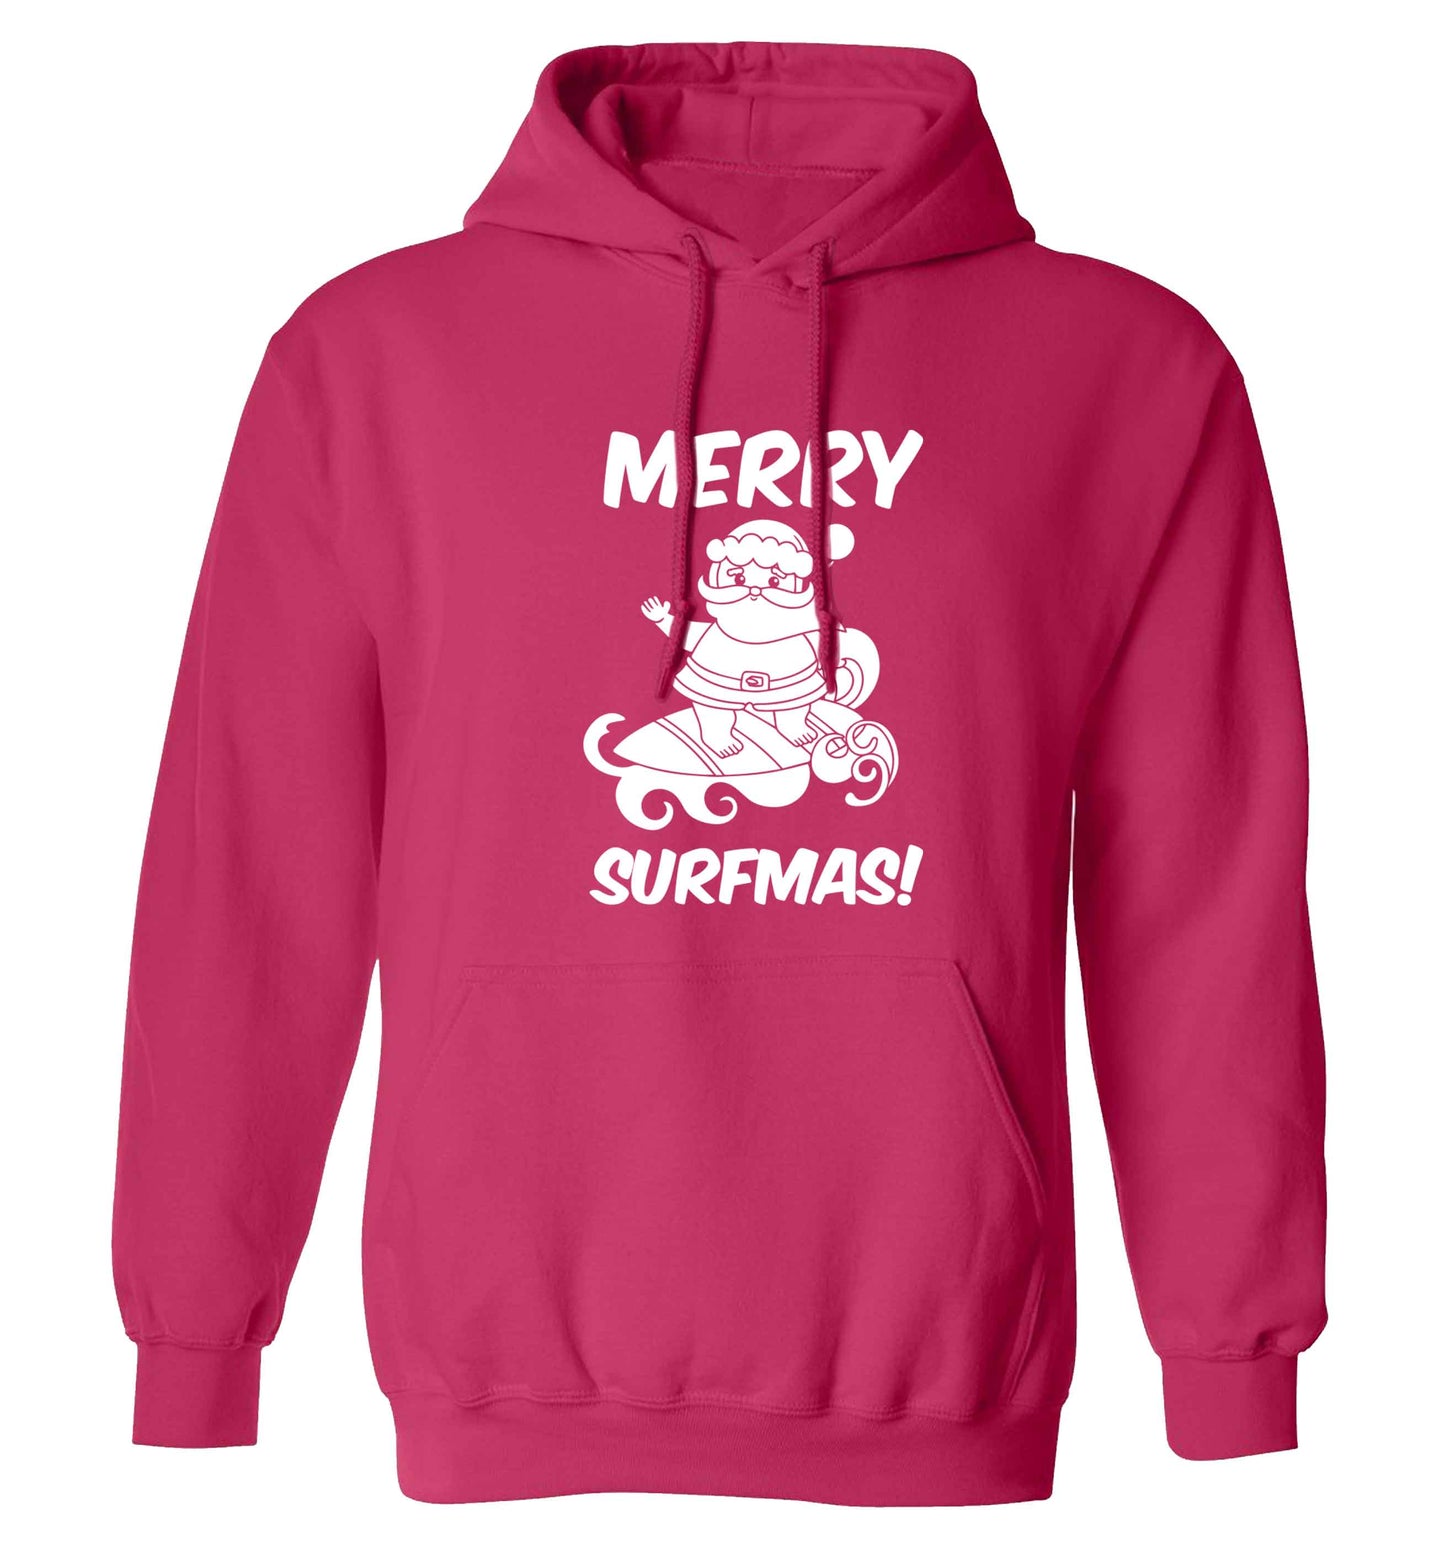 Daddy Christmas Kisses Overseas adults unisex pink hoodie 2XL